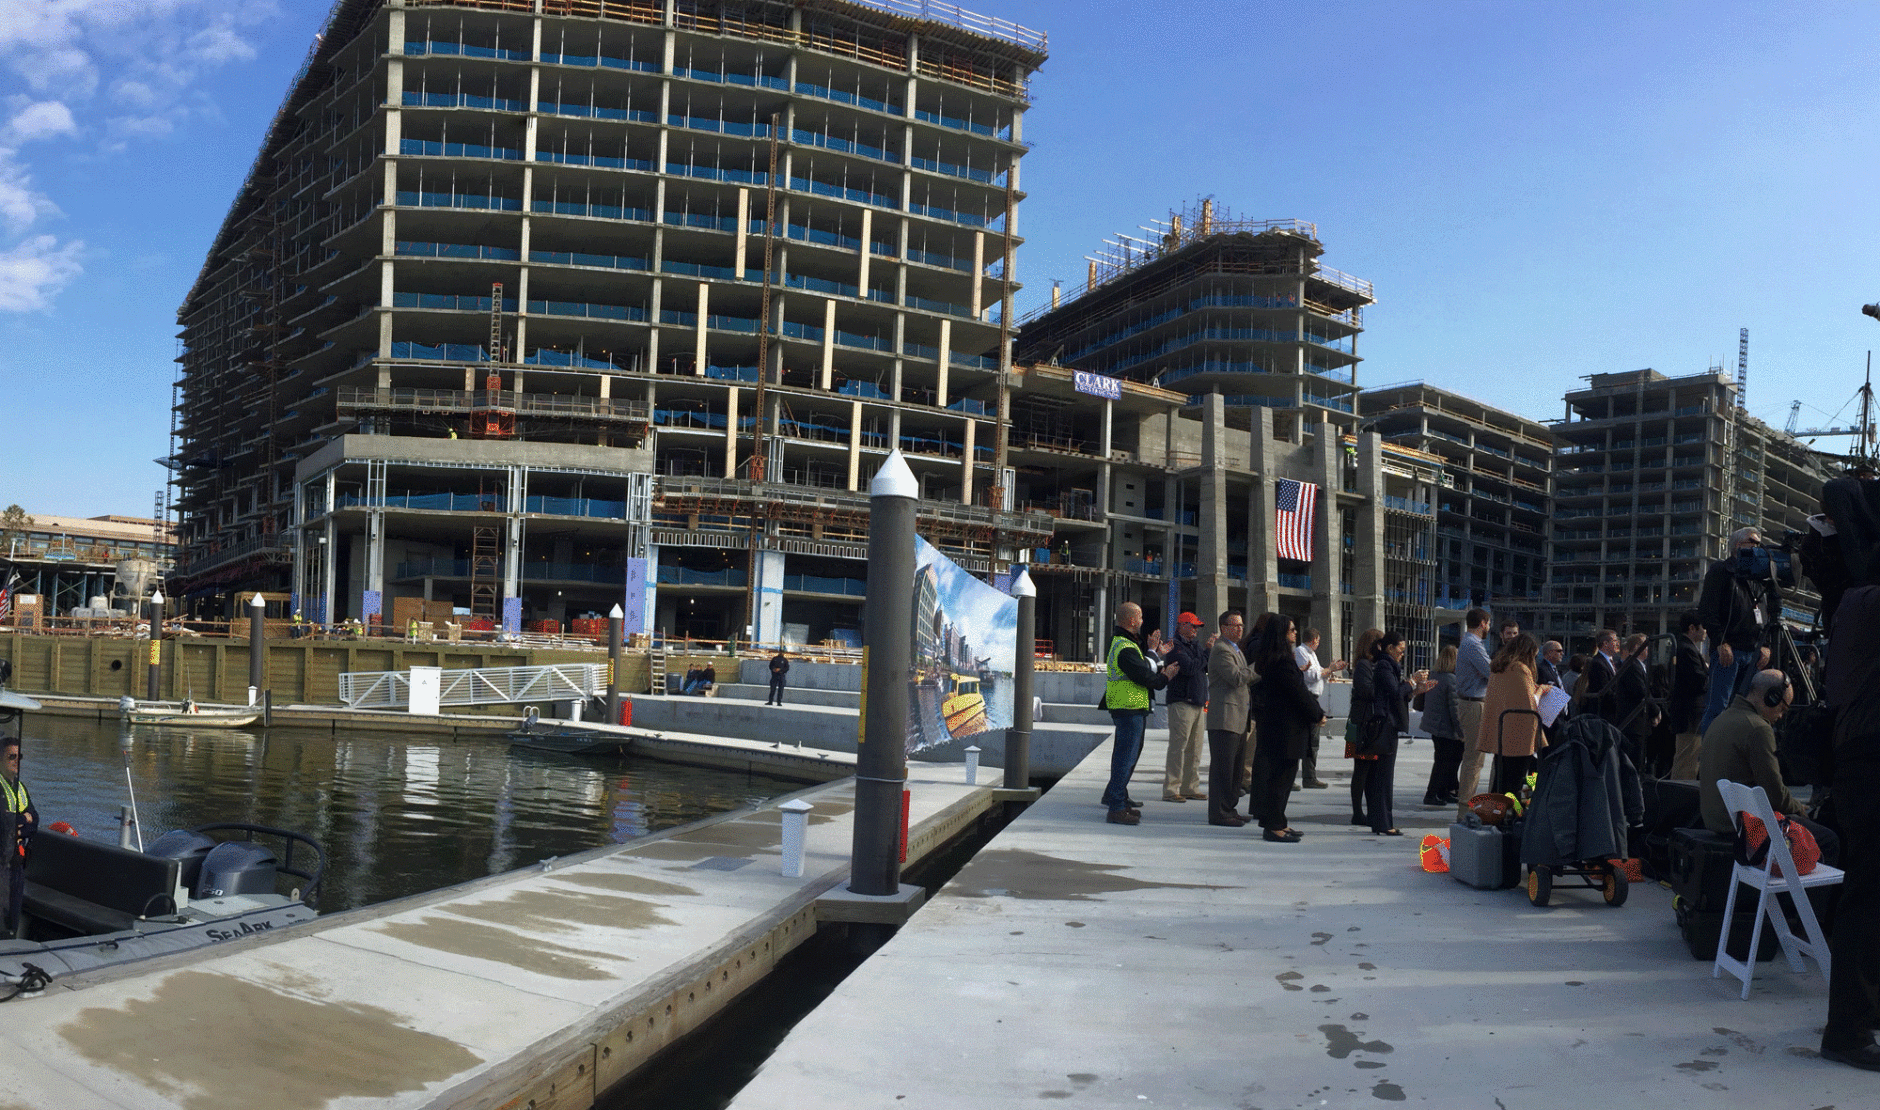 The Wharf will feature year-round waterside activities and events. "Even the buildings and the cafes, they all open up within 40 feet of the water," said P.N. Hoffman CEO of Monty Hoffman, a co-developer of The Wharf. (WTOP/Kristi King)